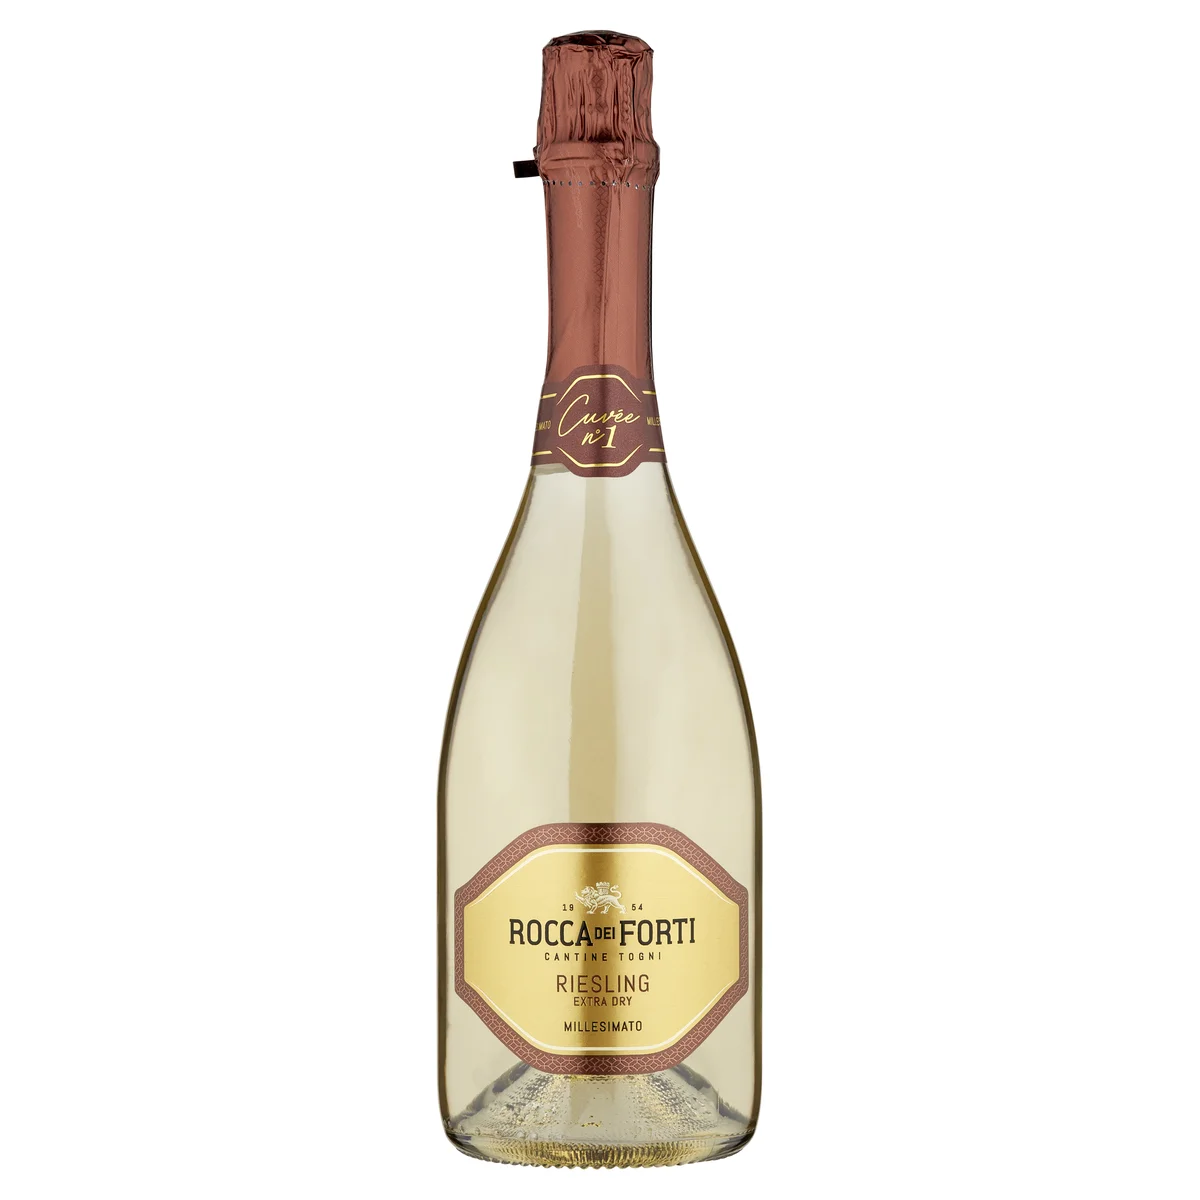 Forti dei Millesimato Dry cl Cuvée Extra n°1 75 Rocca